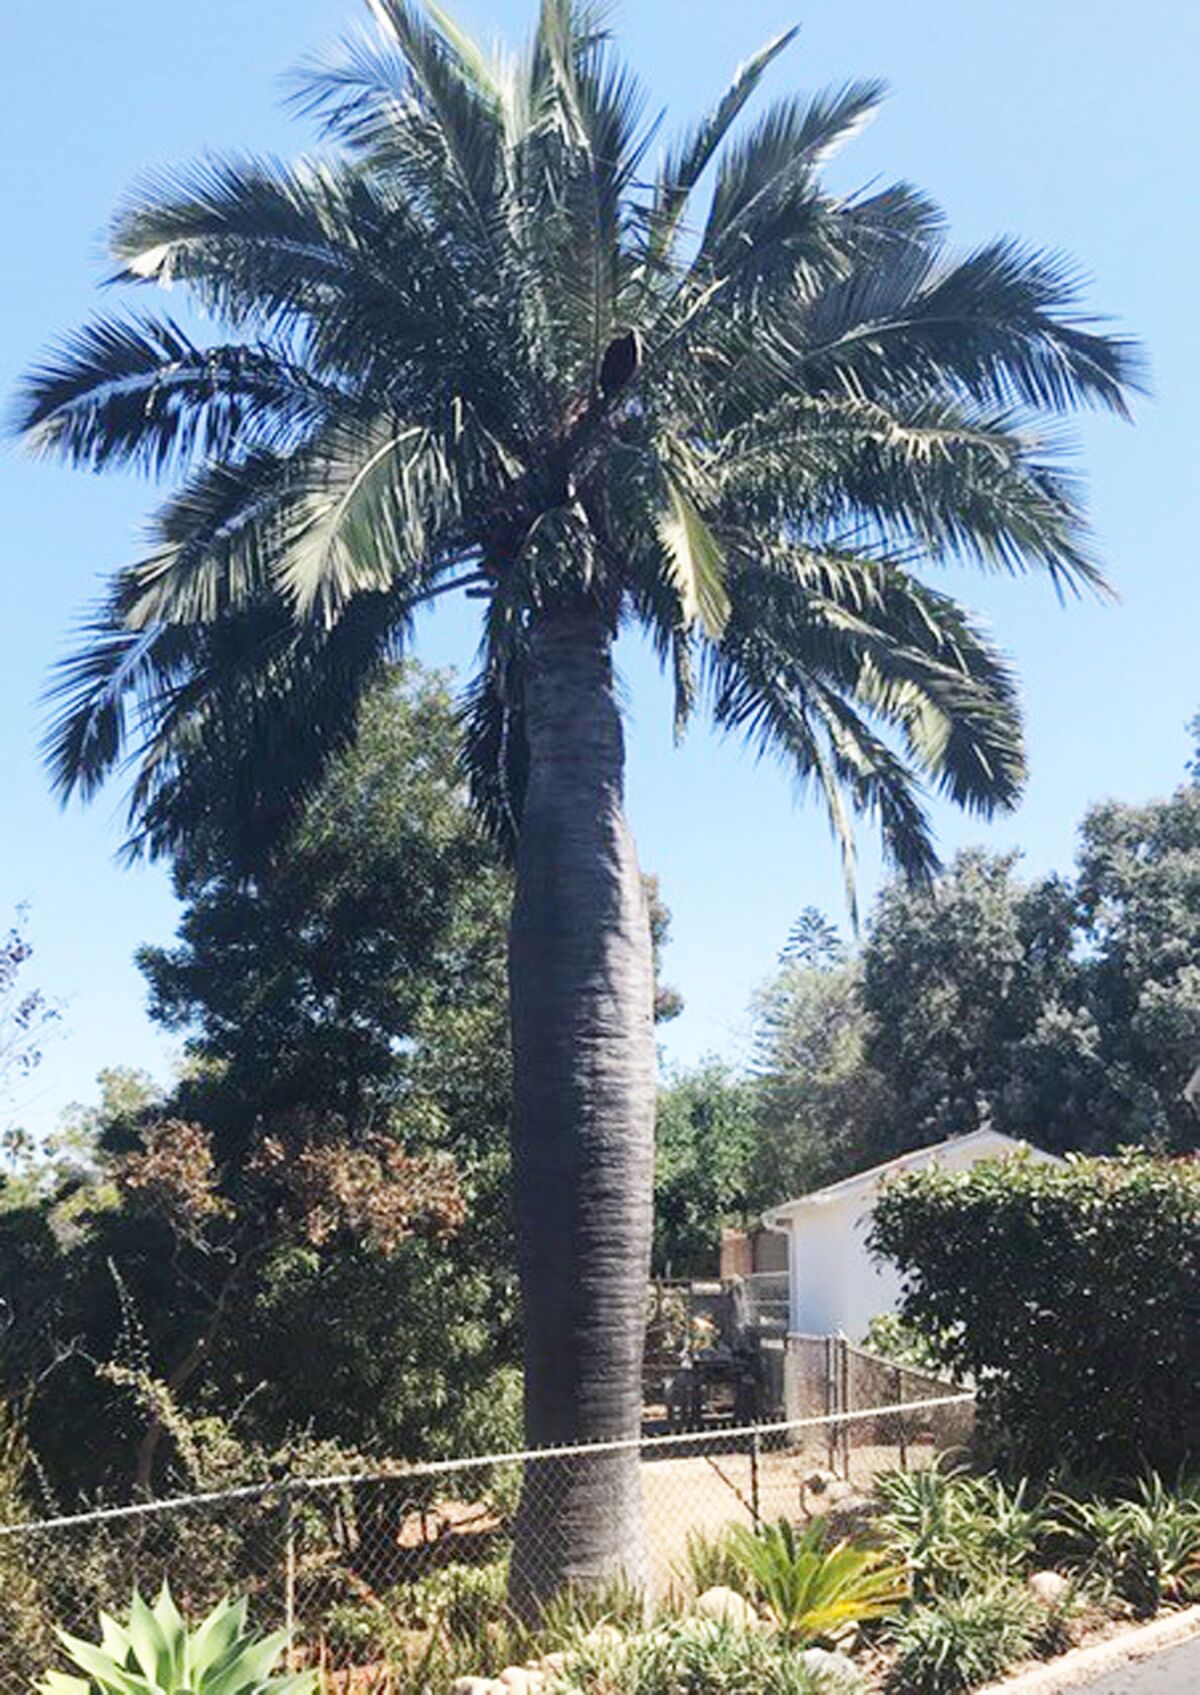 This Chilean wine palm in Carol Mulcahy’s front yard, pictured when it was healthy, was possibly planted by Kate Sessions.